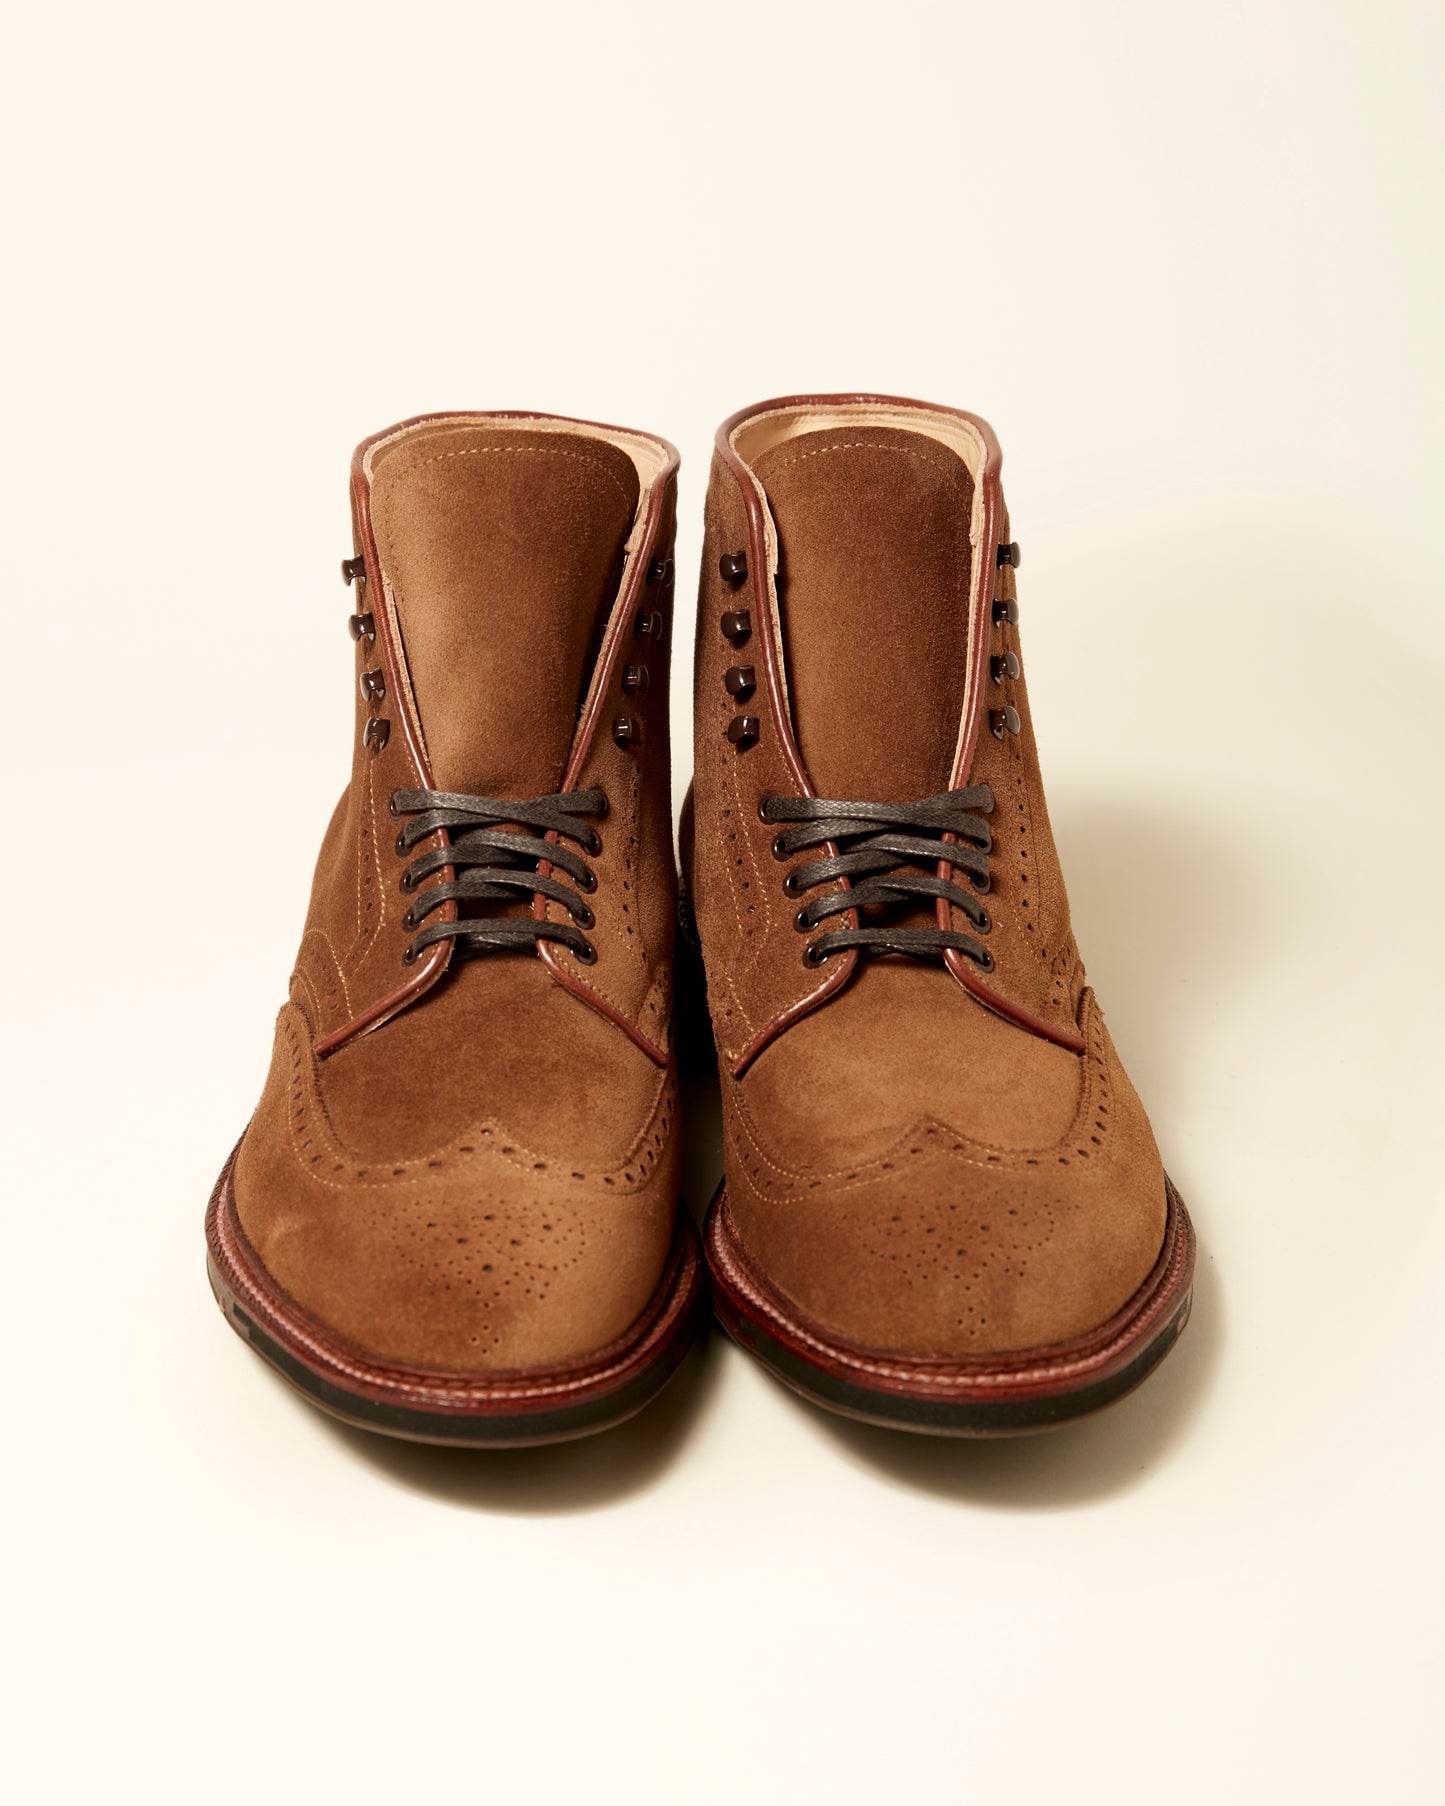 "Yenni" Wing Tip Boot in Snuff Suede, Barrie Last